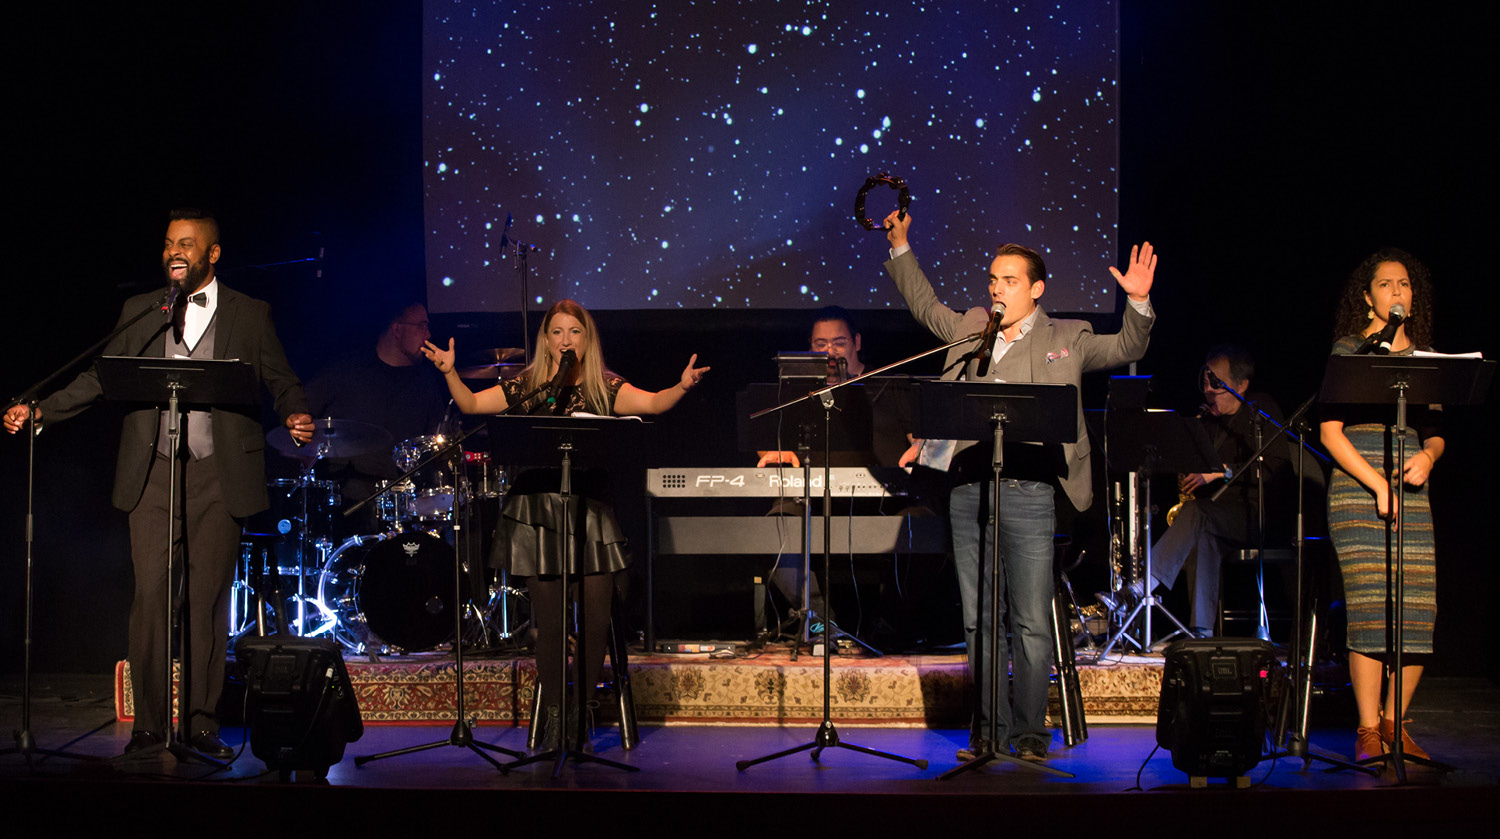 Image of four singers and three musicians performing on stage in front of a blue night sky projection. The singers, two male and two female, stand downstage with music stands and microphones in front of them. Behind them, the male musicians play drums, keyboard, and saxophone. 